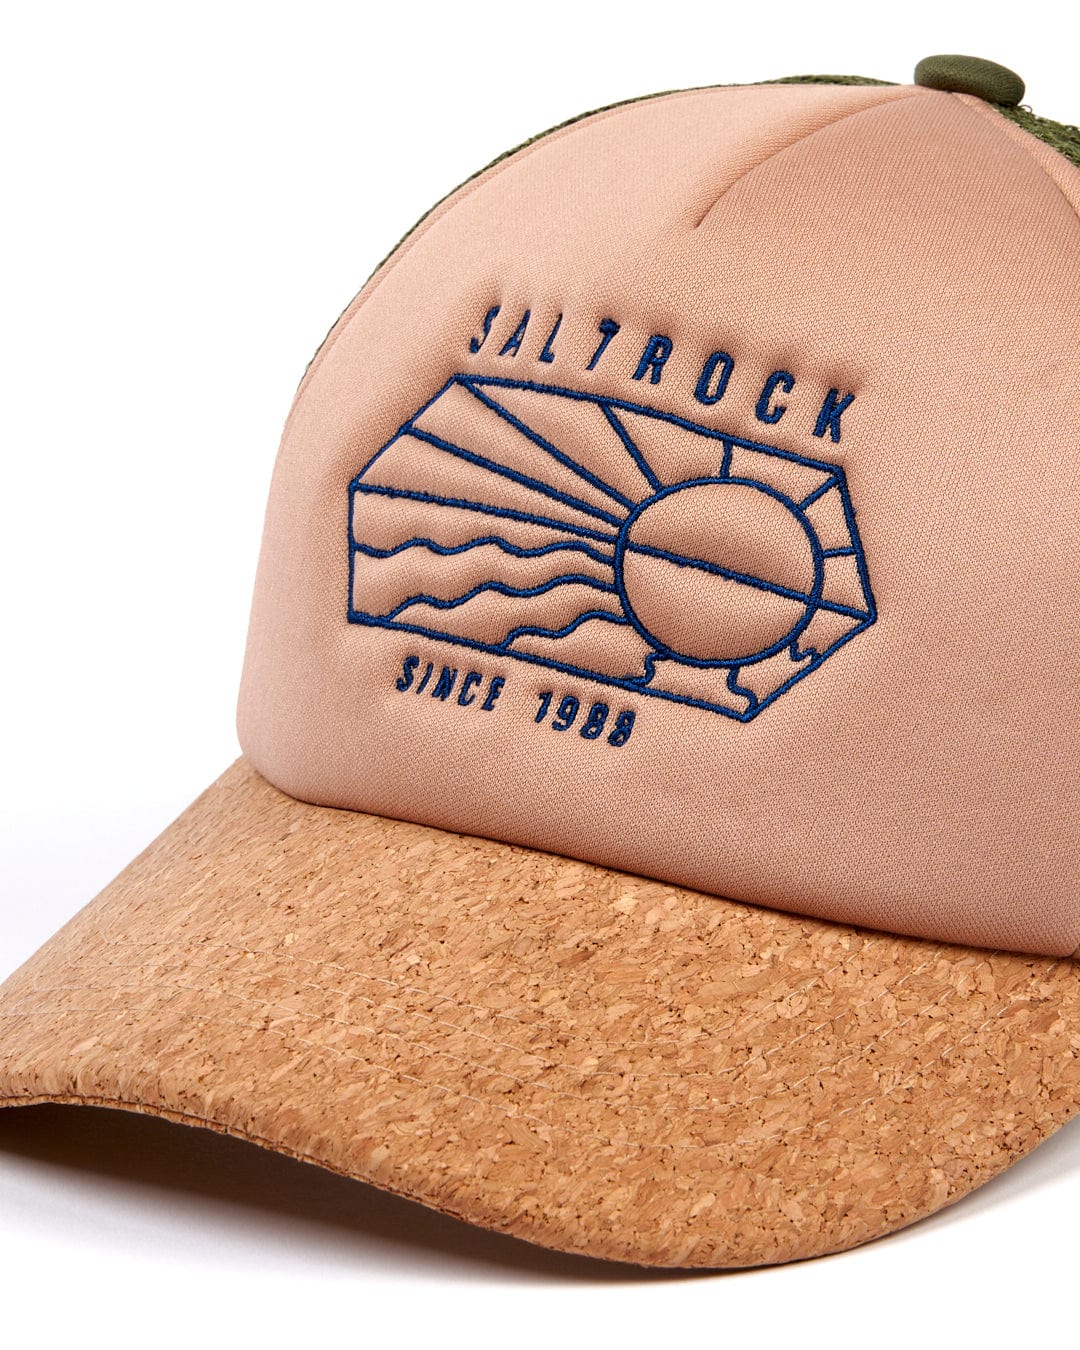 An embroidered hat with the word Saltrock on it.